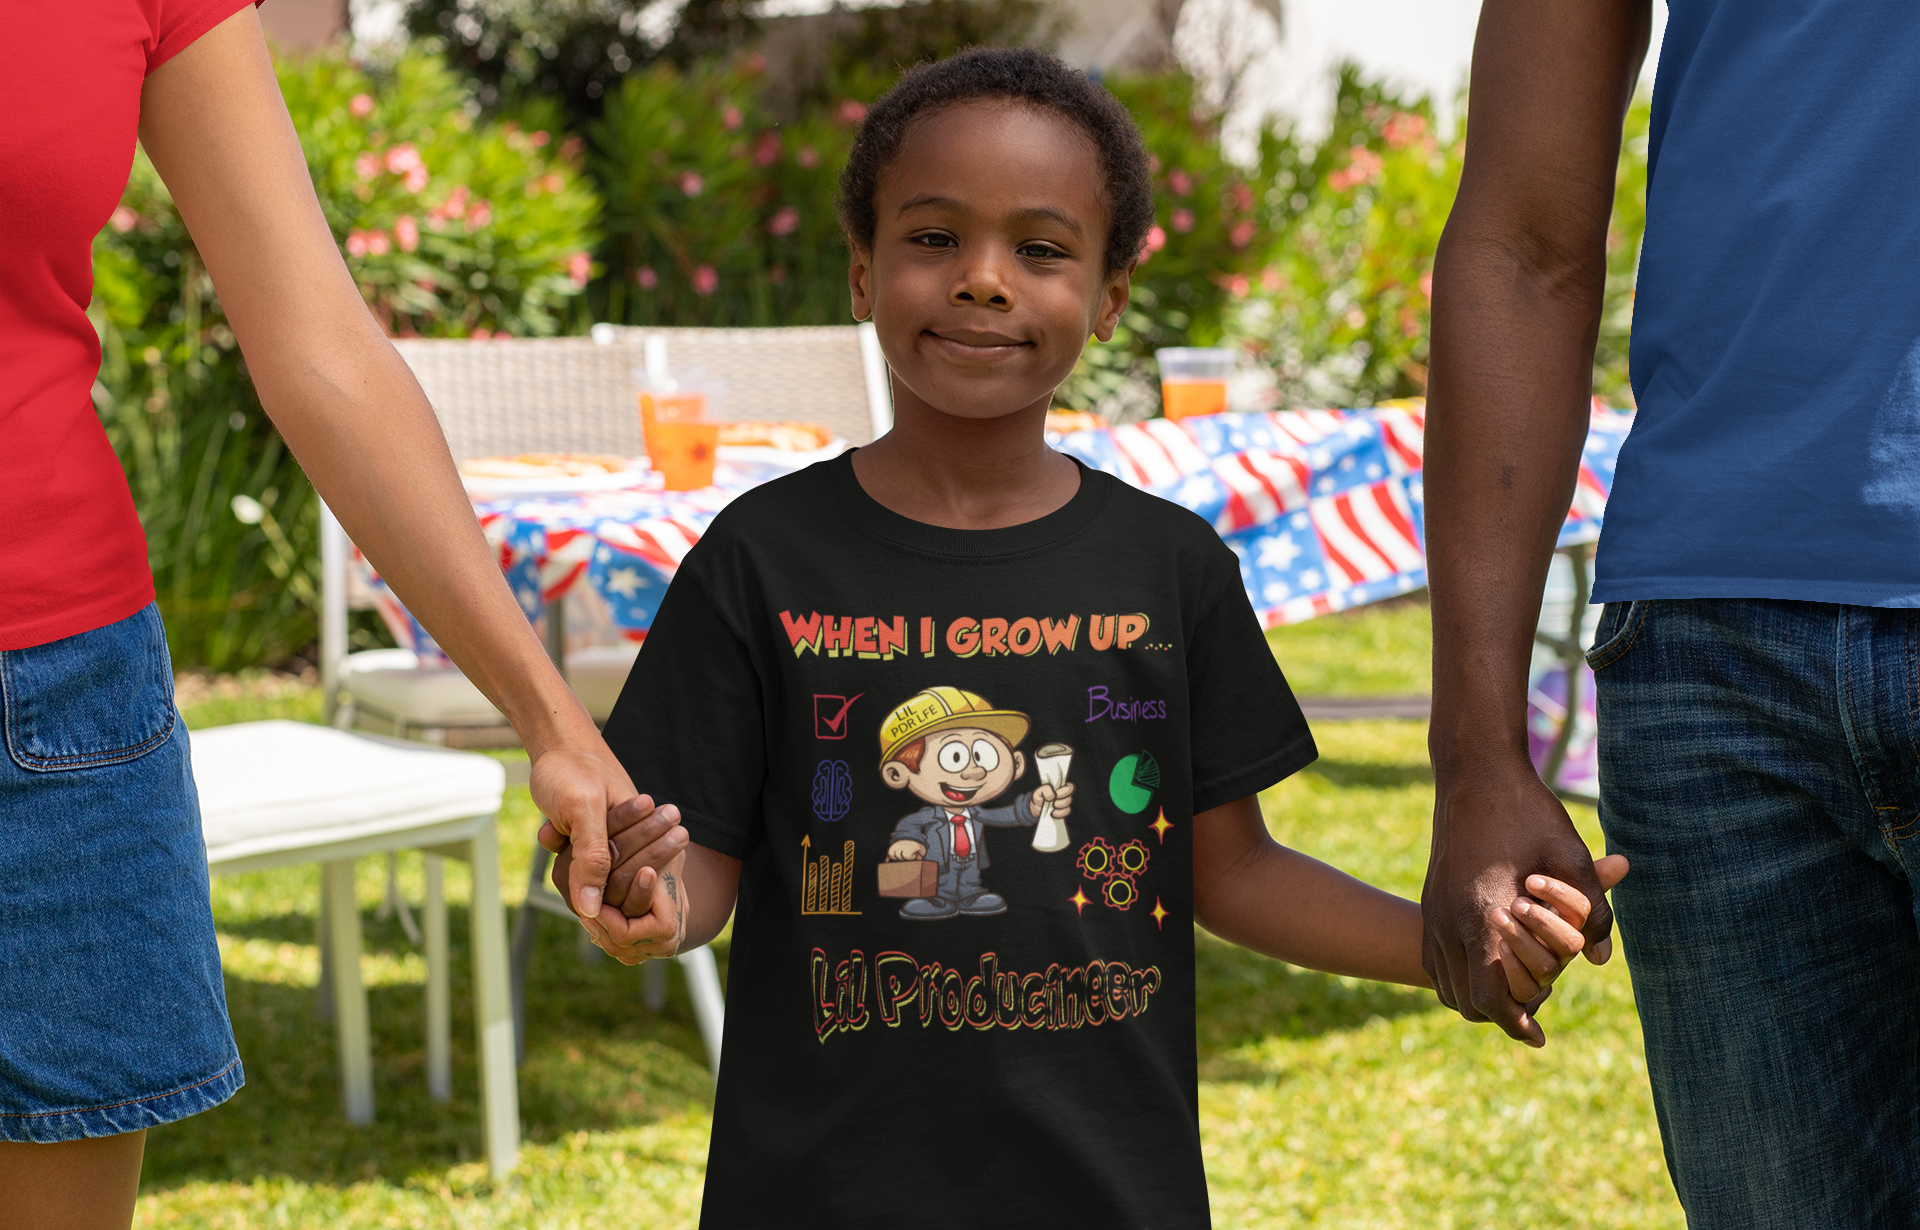 WHEN I GROW UP LIL PRODUCINEER Toddler T-shirt - PDR L.F.E. PDR LFE